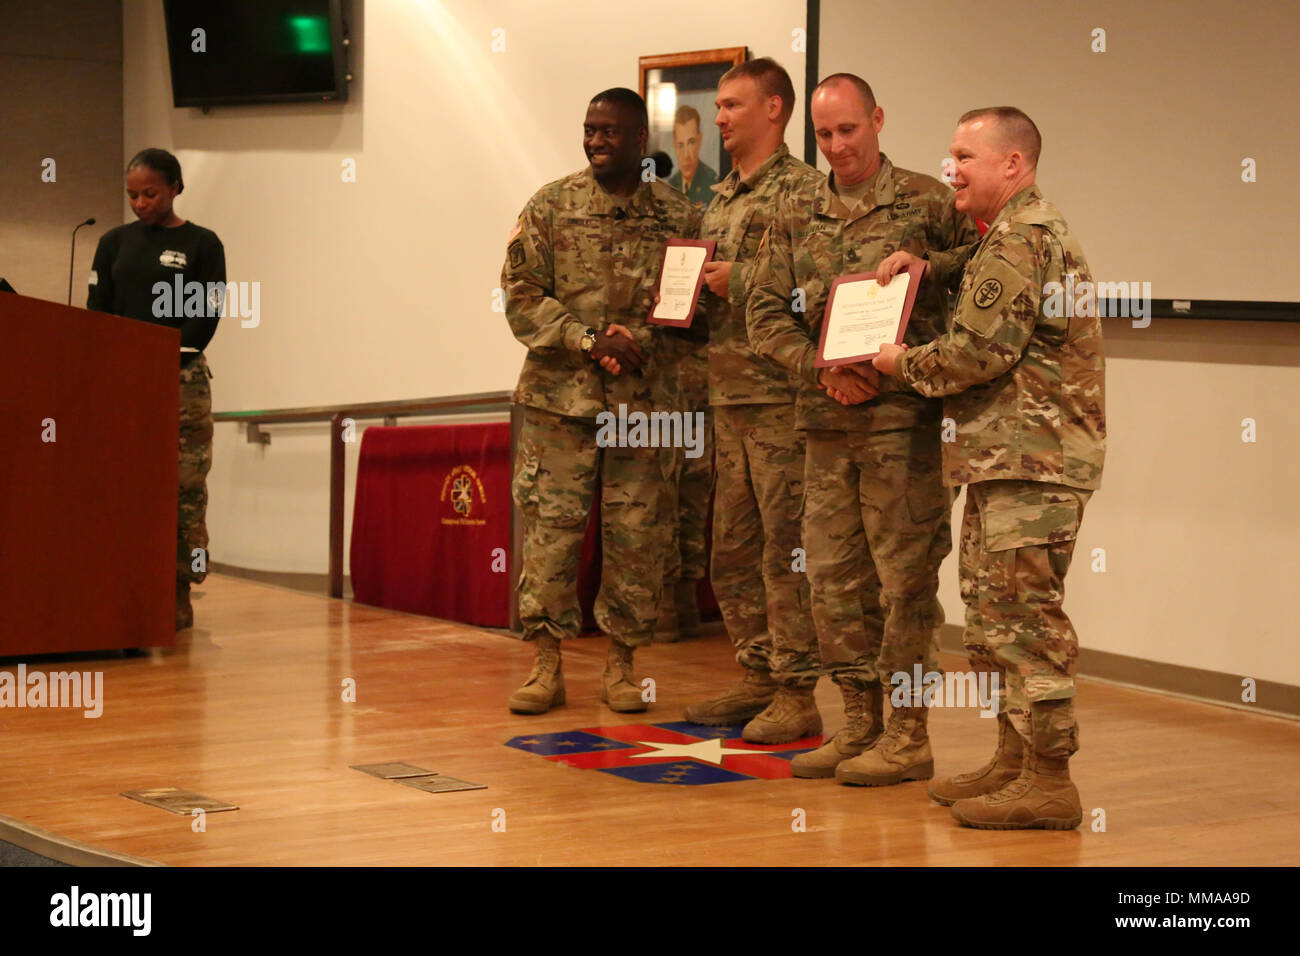 U.S. Army Sgt. 1st Class Christopher Ellis and Staff Sgt. Eric Sullivan, assigned to the Blanchfield Army Community Hospital, receive awards from Brig. Gen. R. Scott Dingle and Command Sgt. Maj. Matthew Brady during the 2017 Best Medic Competition Award Ceremony at Fort Bragg, N.C., Sept. 20, 2017. The competition tested the physical and mental toughness, as well as the technical competence, of each medic to identify the team moving forward to represent the region at the next level of the competition.  (U.S. Army photo by Pfc. Meleesa Gutierrez) Stock Photo